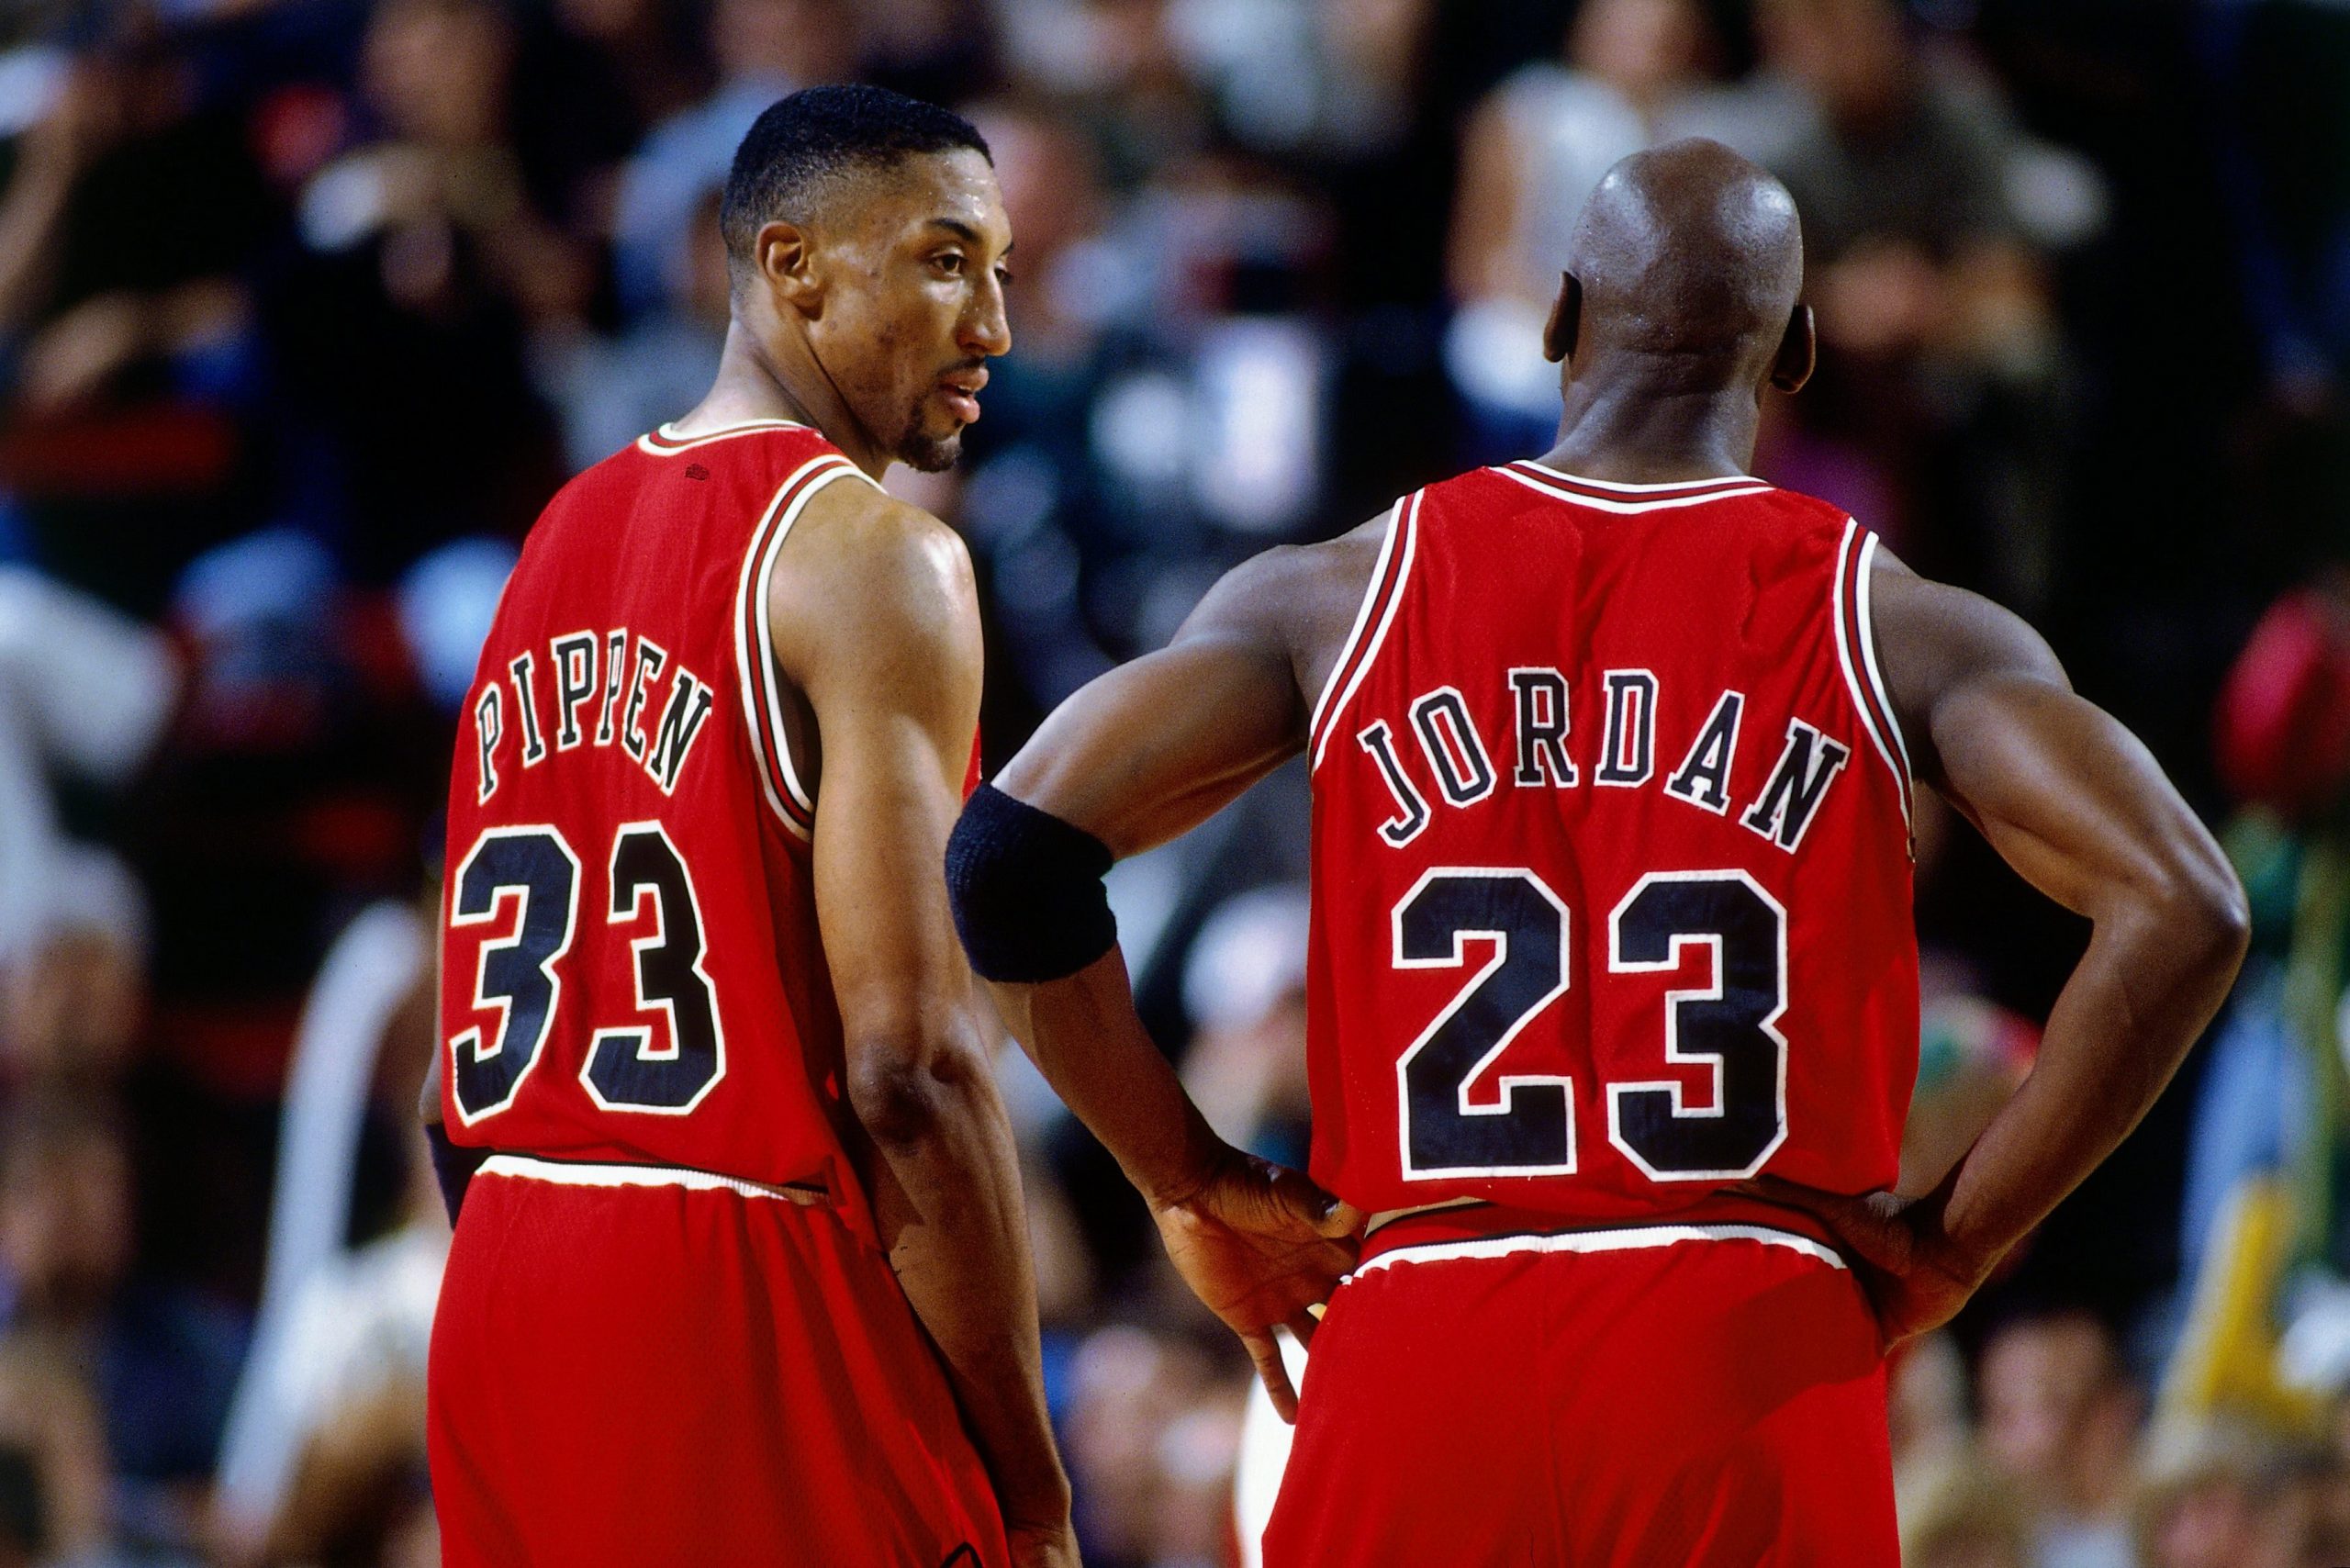 SEATTLE - JUNE 14:  Michael Jordan #23 and Scottie Pippen #33 of the Chicago Bulls discuss strategy against the Seattle SuperSonics in Game Five of the 1996 NBA Finals at Key Arena on June 14, 1996 in Seattle, Washington. The Sonics won 89-78.  NOTE TO USER: User expressly acknowledges that, by downloading and or using this photograph, User is consenting to the terms and conditions of the Getty Images License agreement. Mandatory Copyright Notice: Copyright 1996 NBAE (Photo by Barry Gossage/NBAE